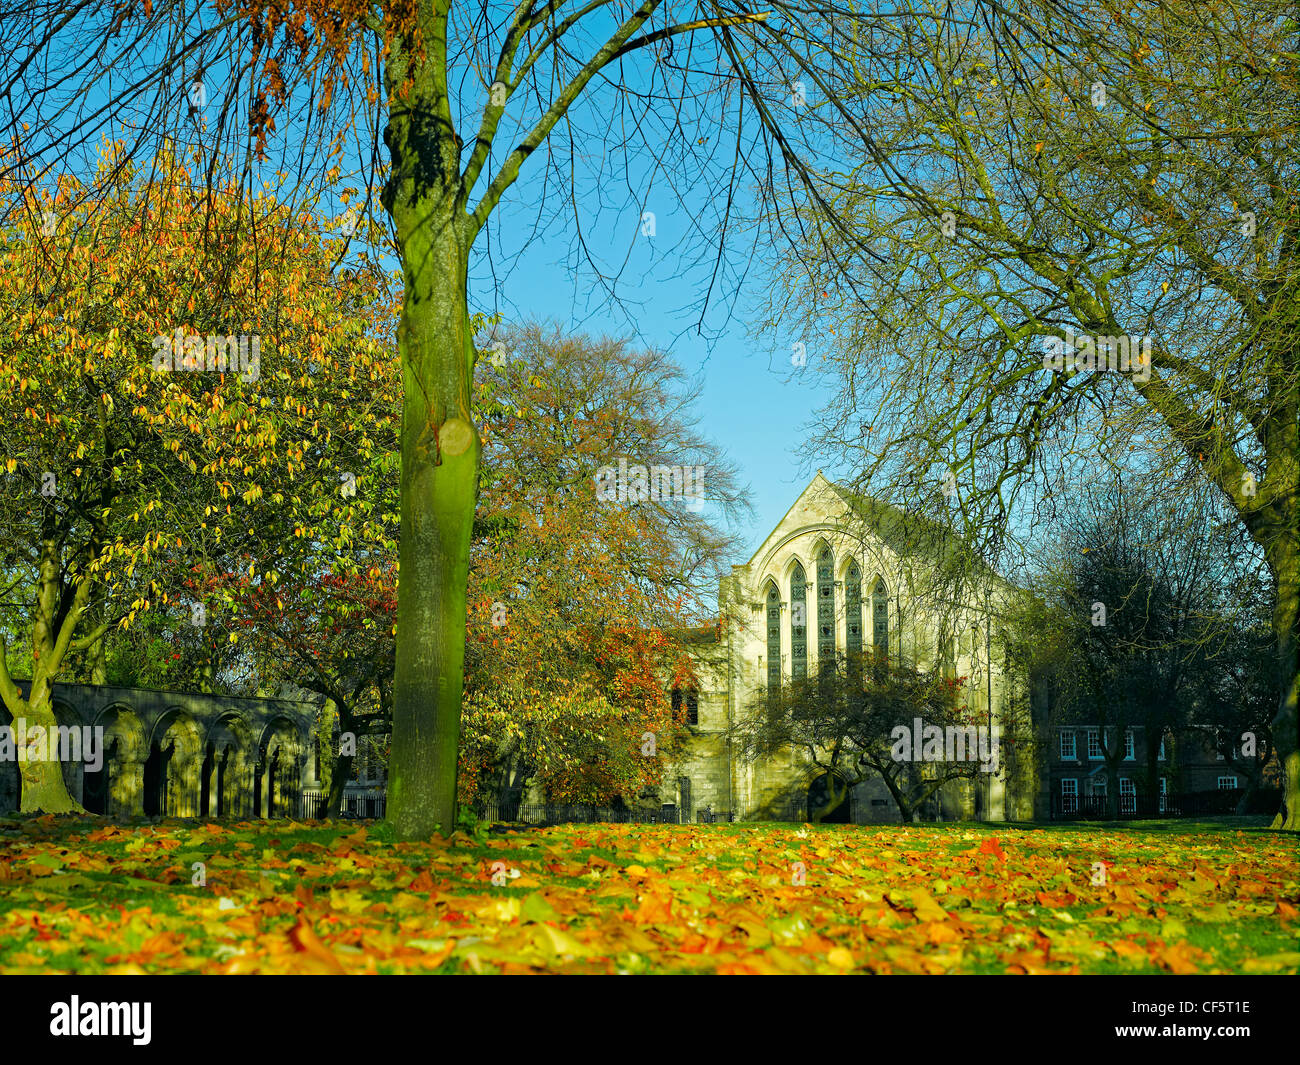 13th century York Minster Library from Deans Park in autumn. Stock Photo